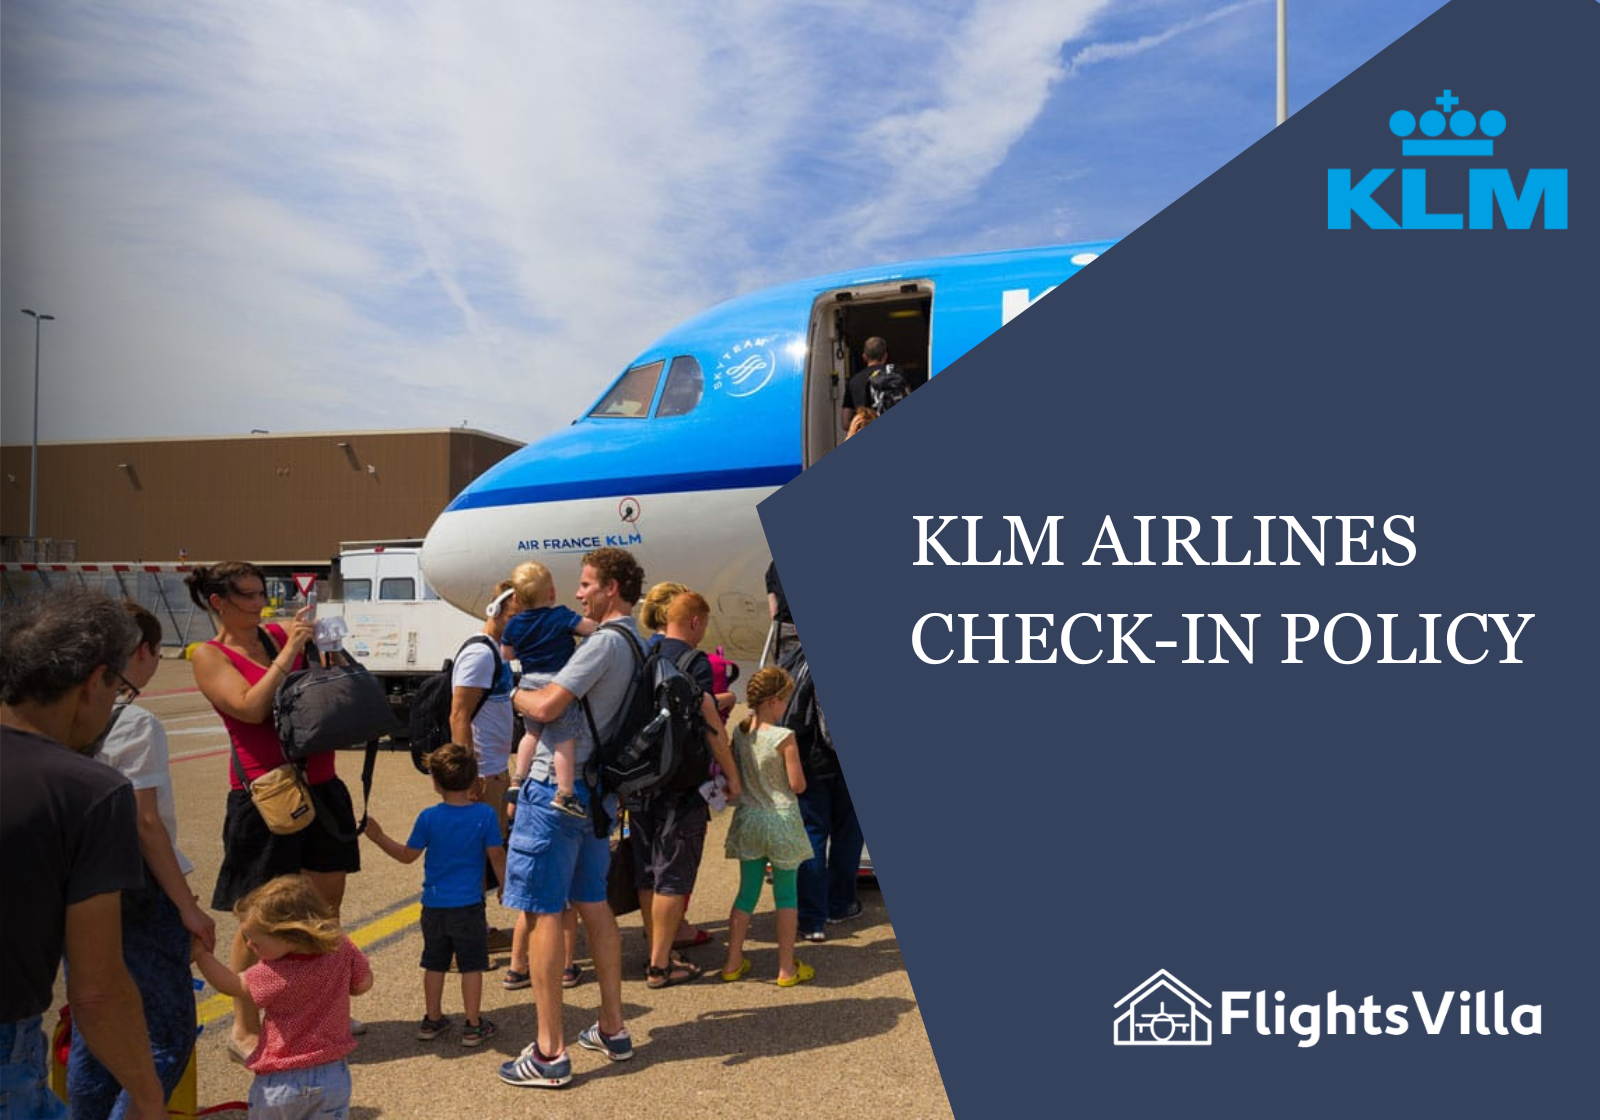 KLM Airlines Check-In Policy